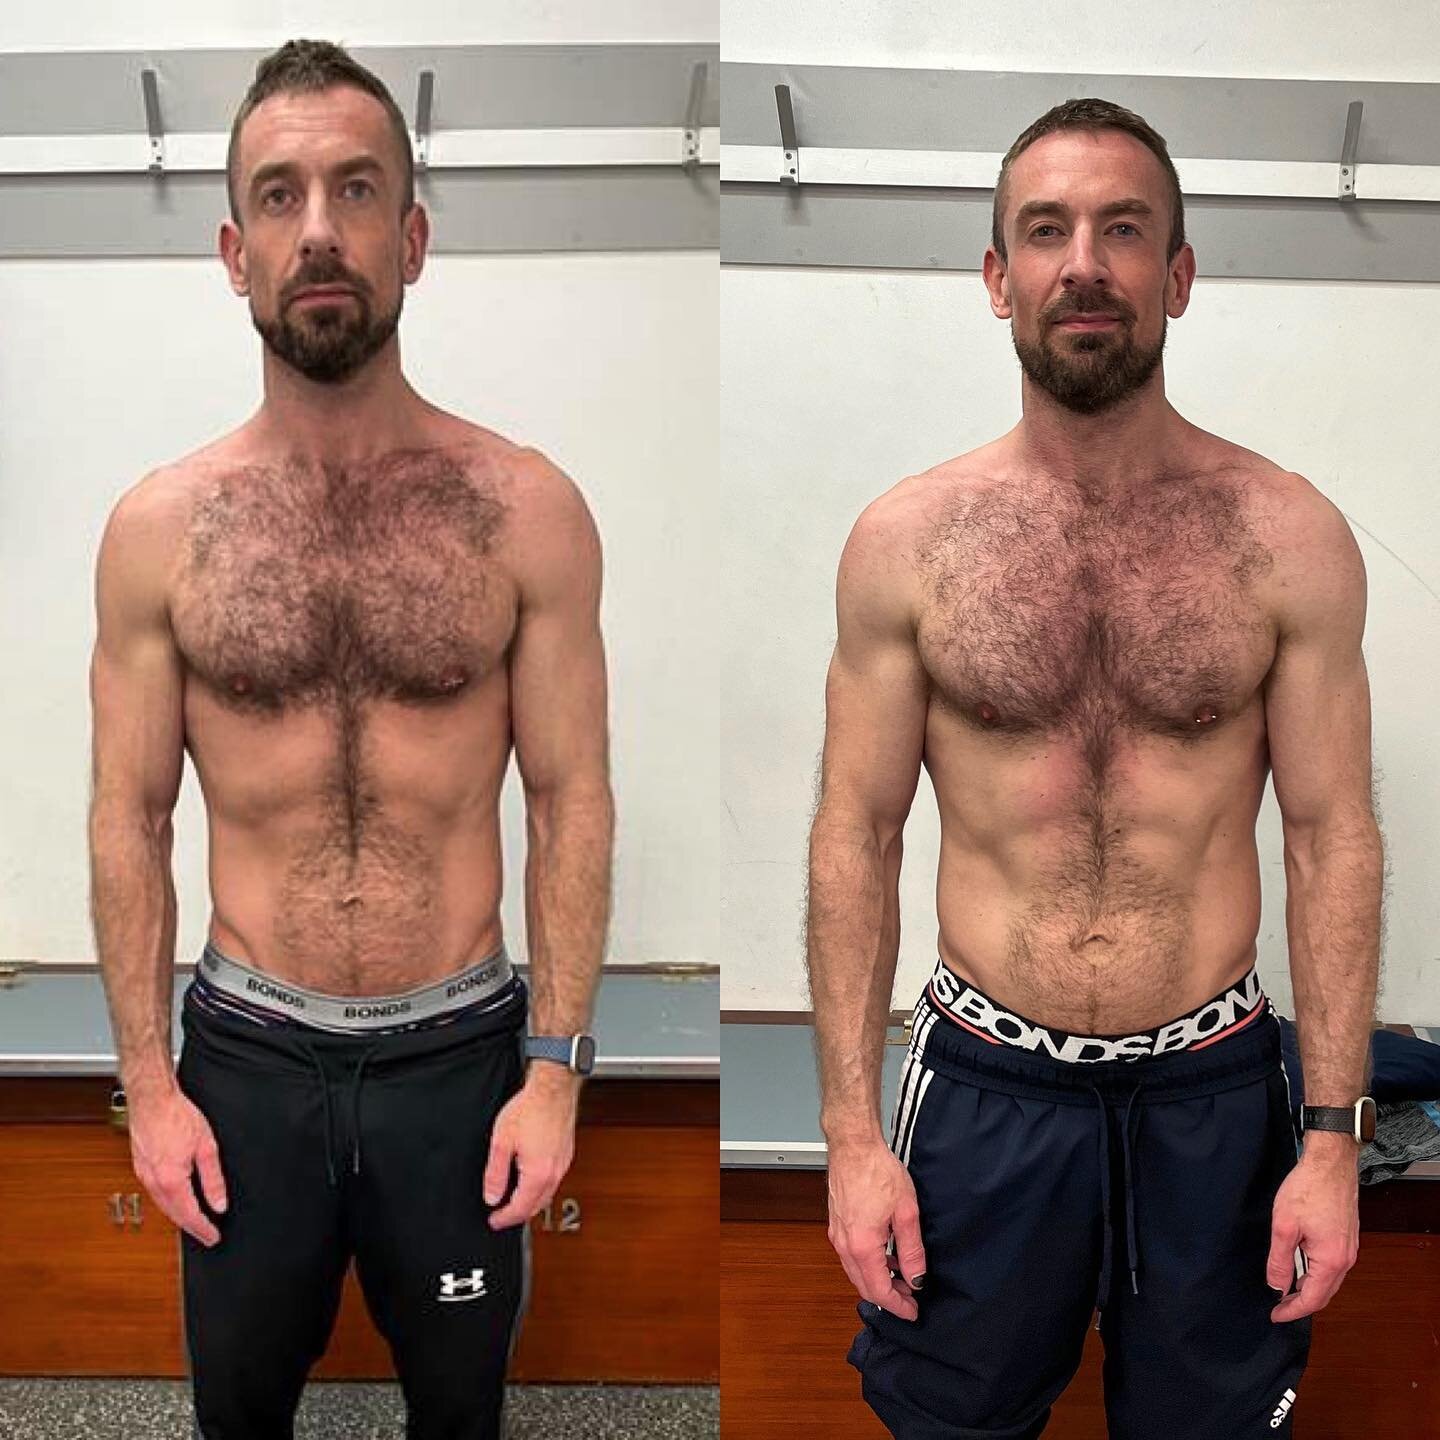 🔥beep beep, where&rsquo;s the fire engine at? 🚒

This is Luke&rsquo;s 3 MONTH Transformation 👀
@heyaluke 

💭 This is what hard work looks like, with a vision in mind. 

Luke is WINNING because he locked into his vision, thought about what he want